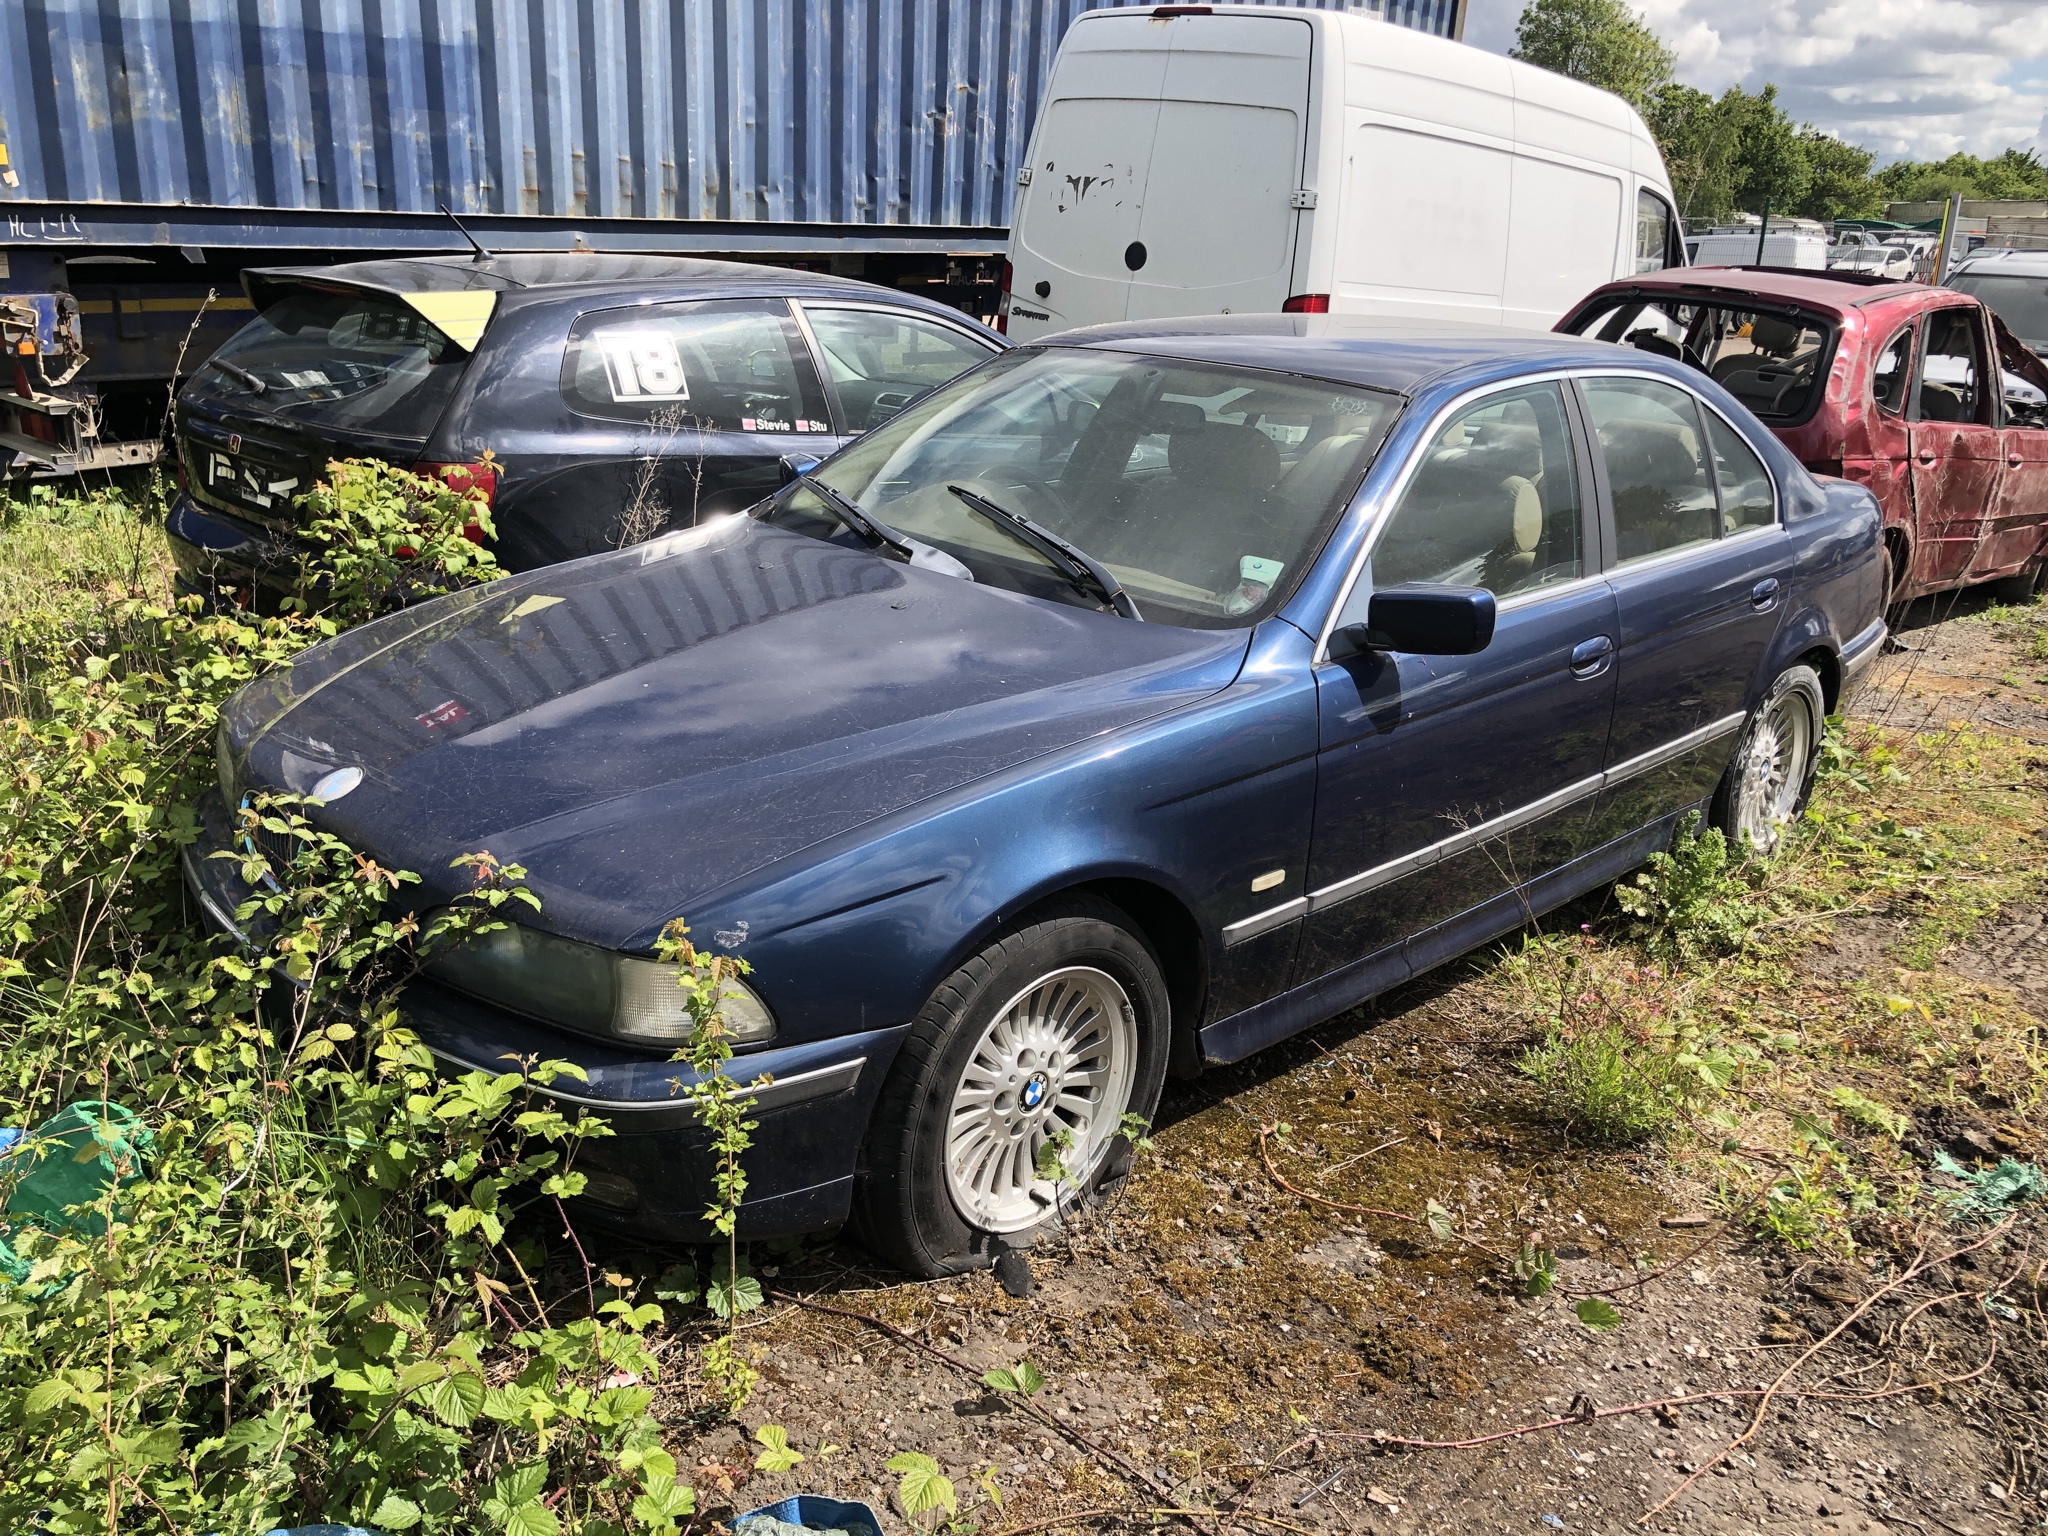 Buyer's Guide: E39 BMW 5 Series